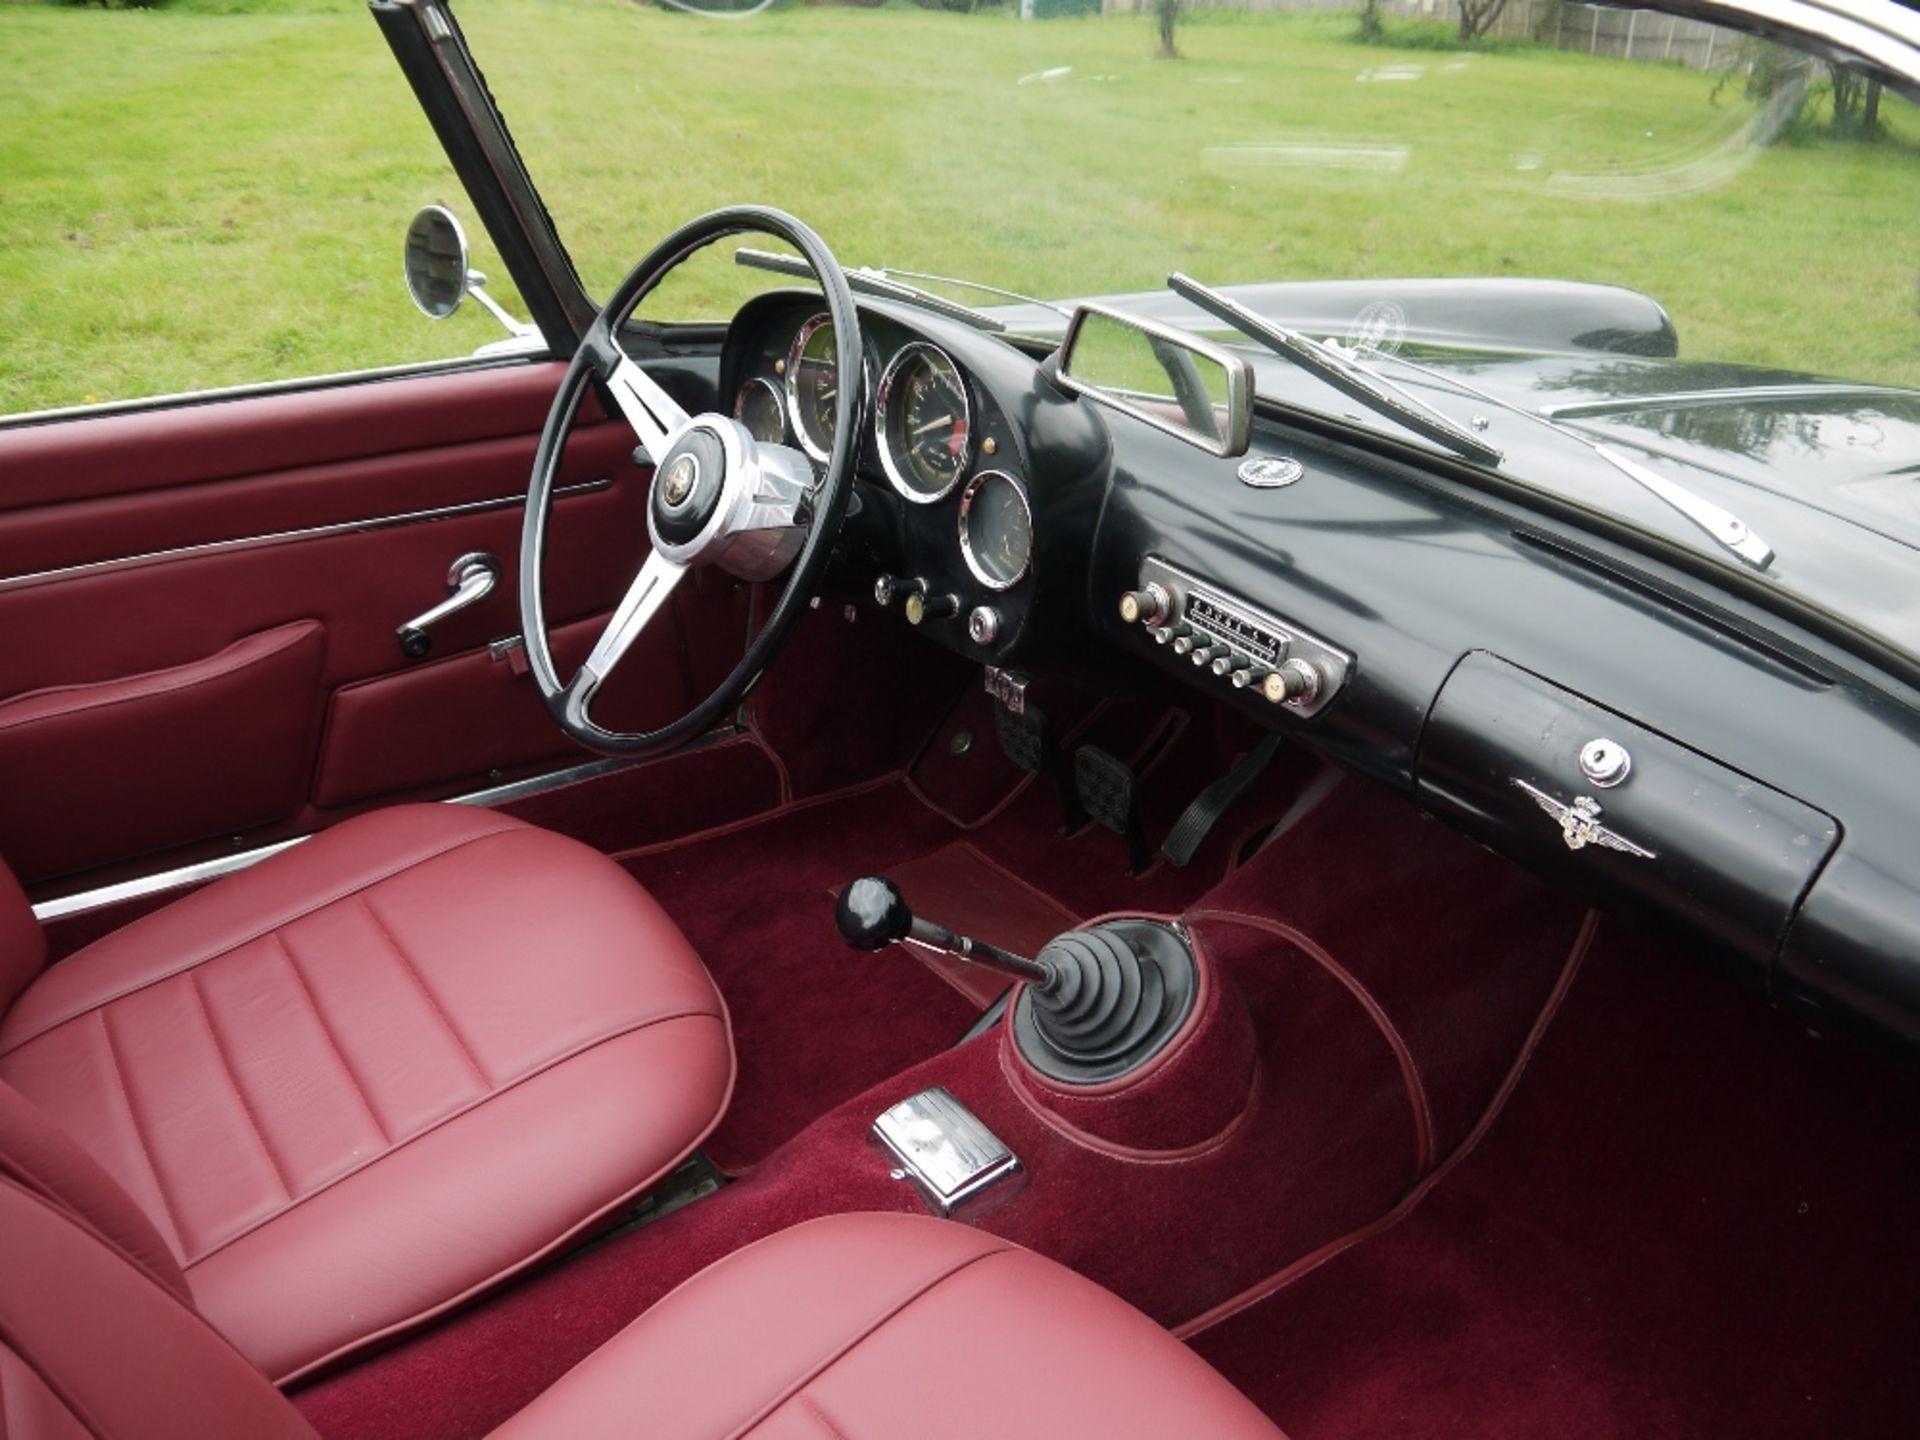 1960 ALFA ROMEO TOURING SPIDER Registration Number: 307 XVJ Chassis Number: AR*10204*000517 Recorded - Image 26 of 36